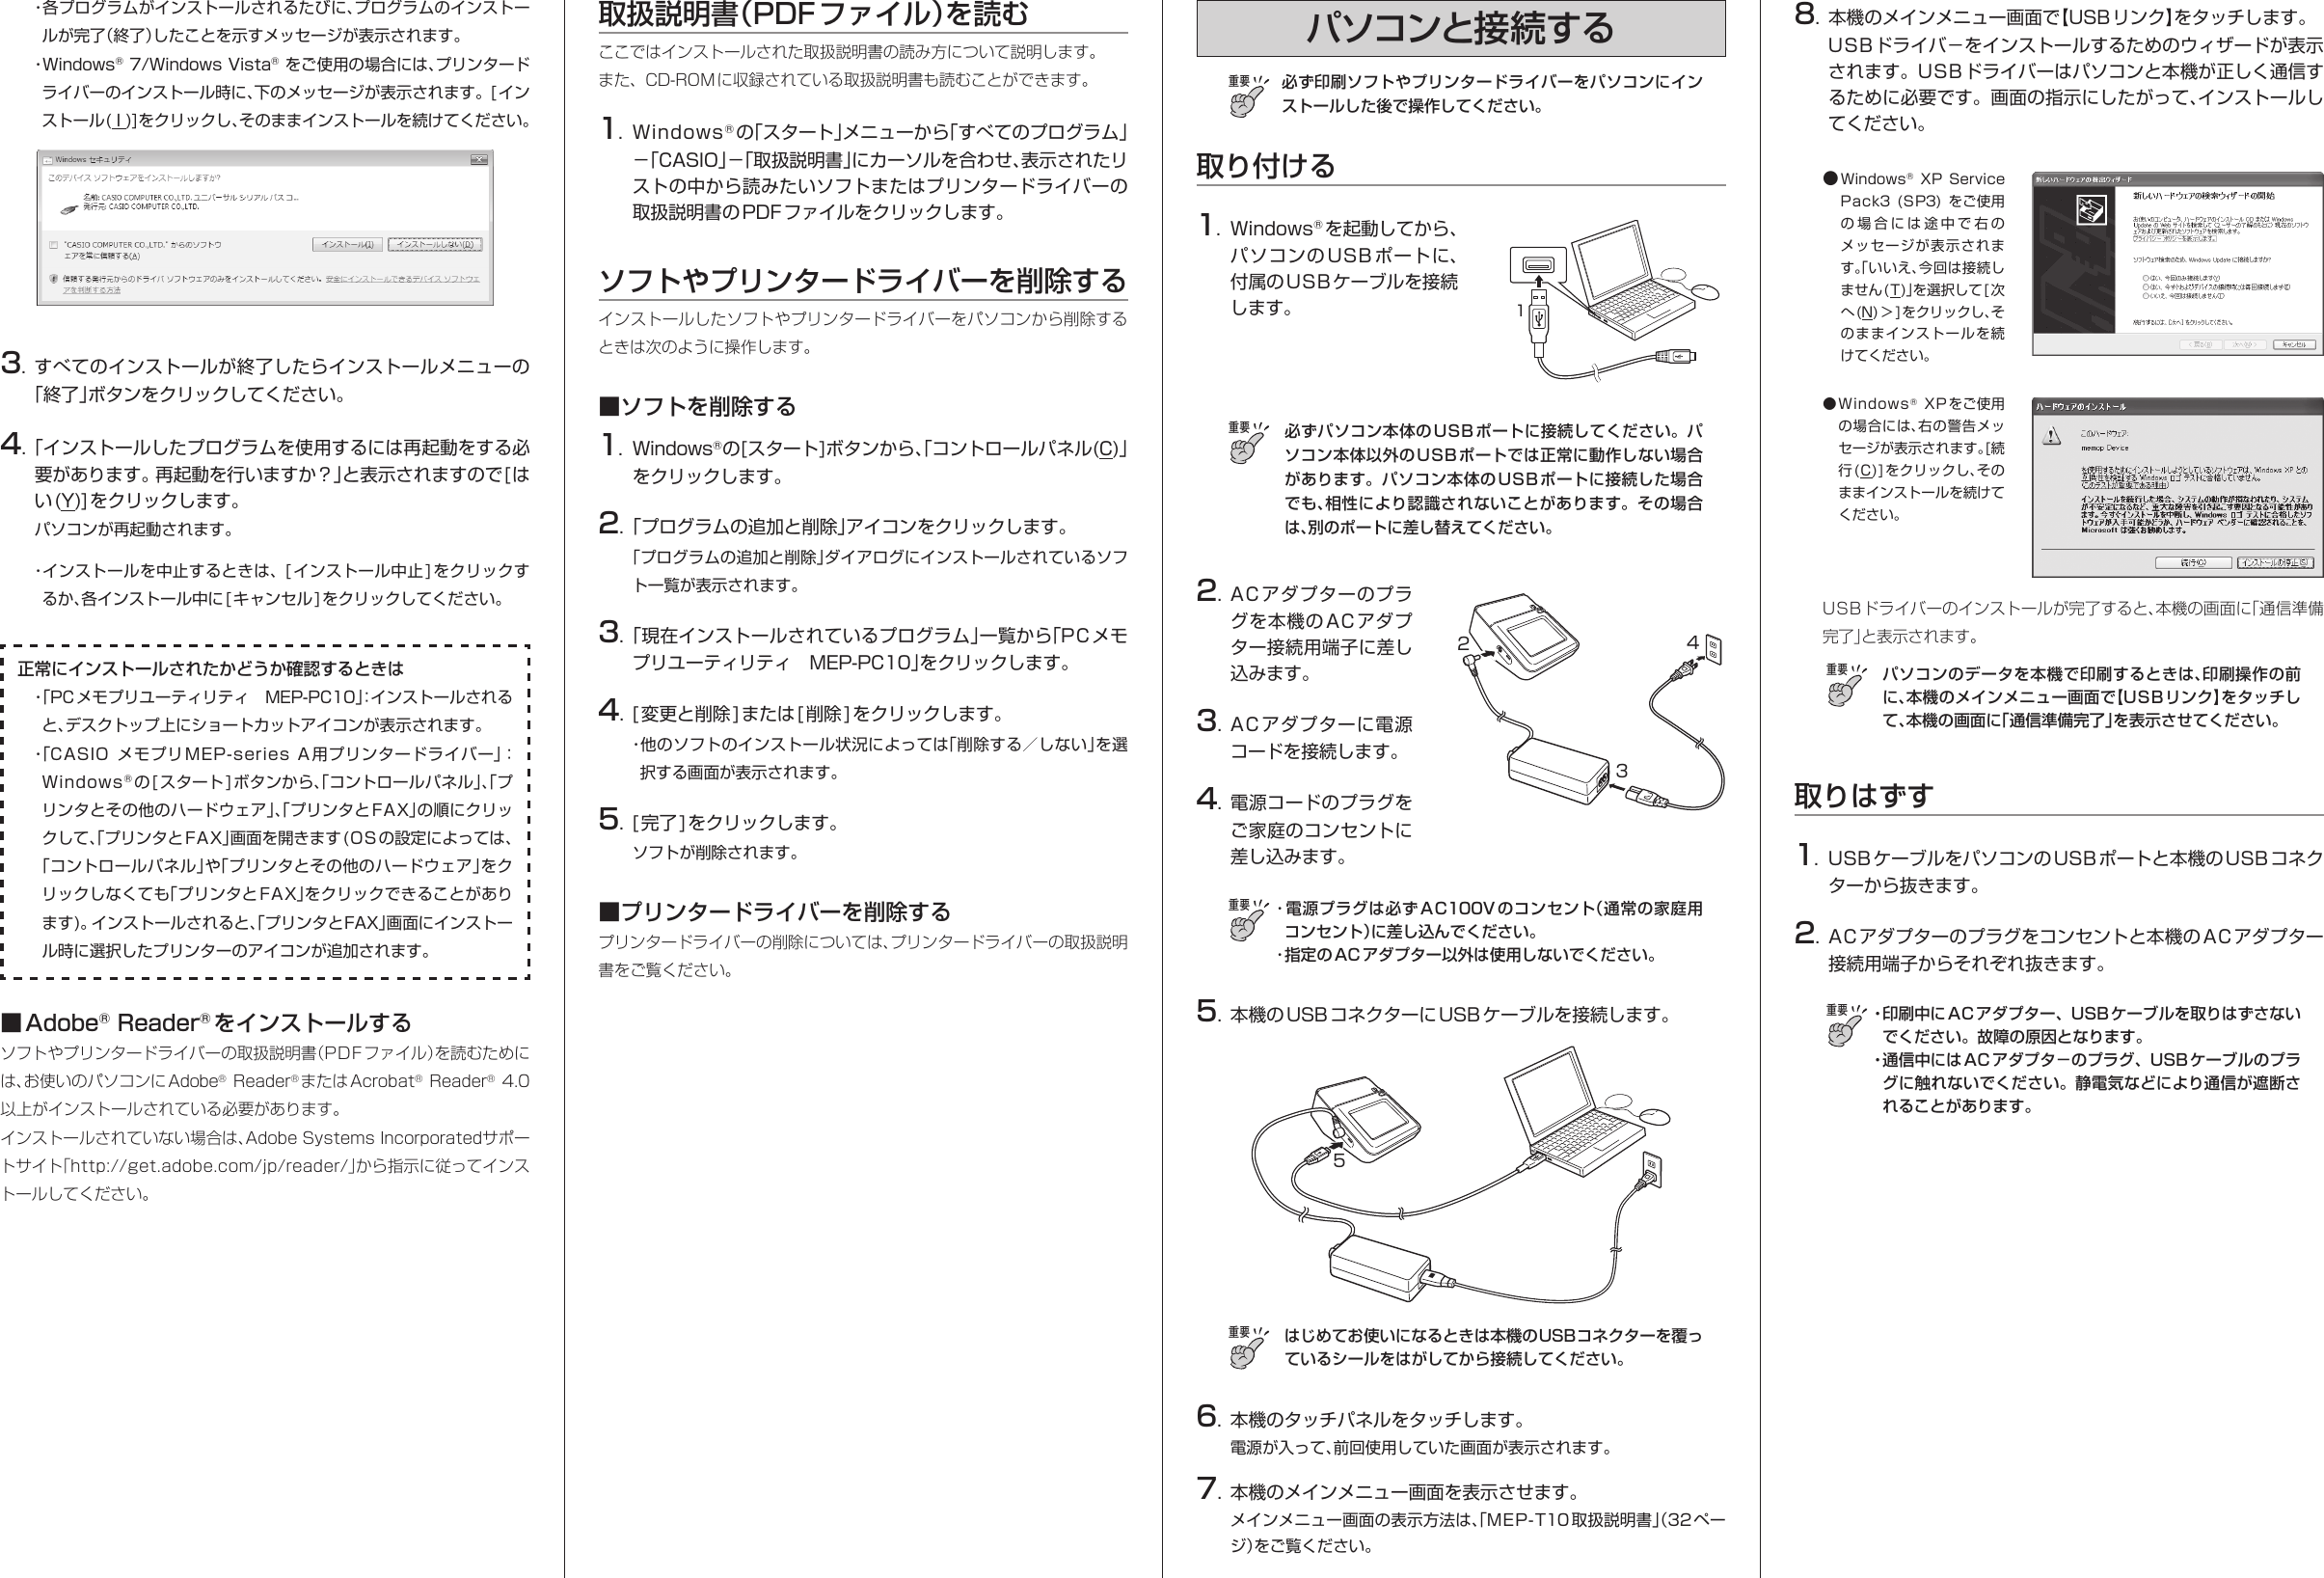 Page 4 of 4 - Casio MEP-T10_Install インストールガイド MEP-T10 Install Guide